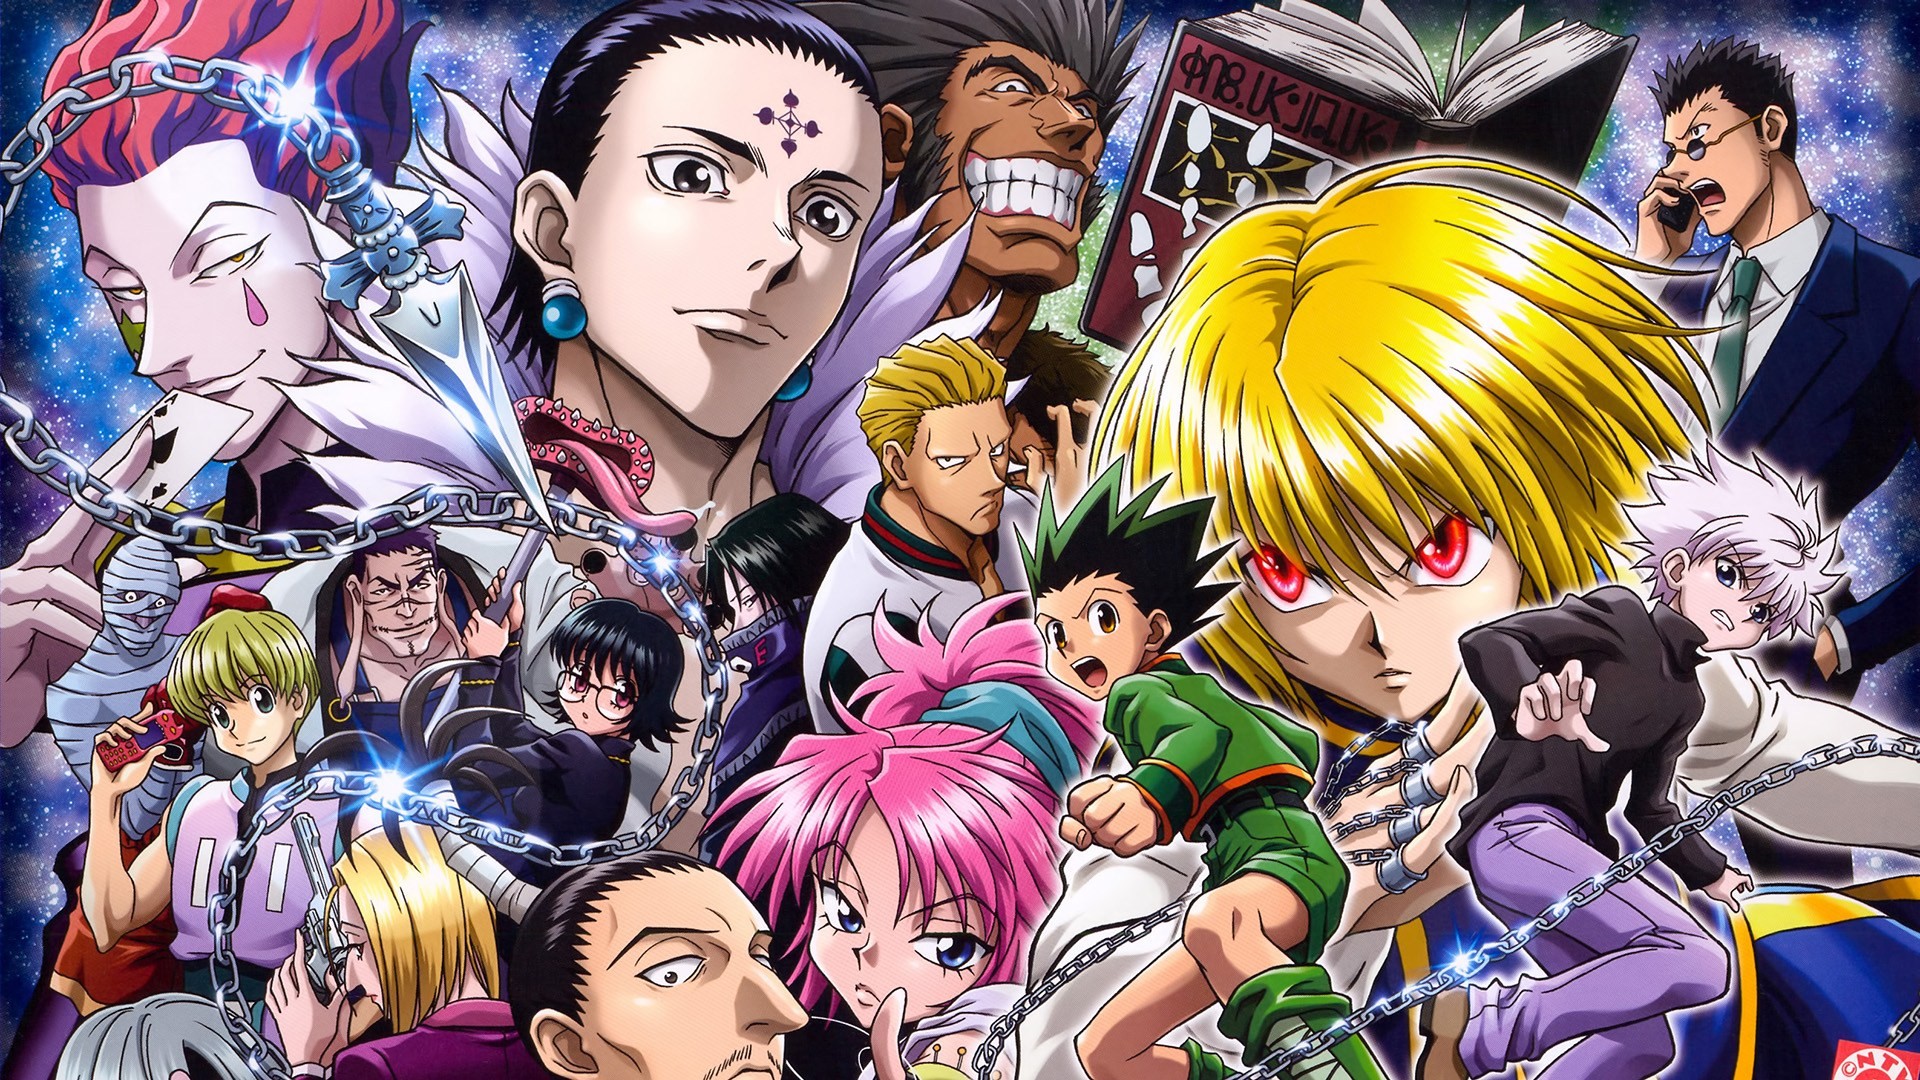 Wallpapers Gon And Killua with high-resolution 1920x1080 pixel. You can use this poster wallpaper for your Desktop Computers, Mac Screensavers, Windows Backgrounds, iPhone Wallpapers, Tablet or Android Lock screen and another Mobile device